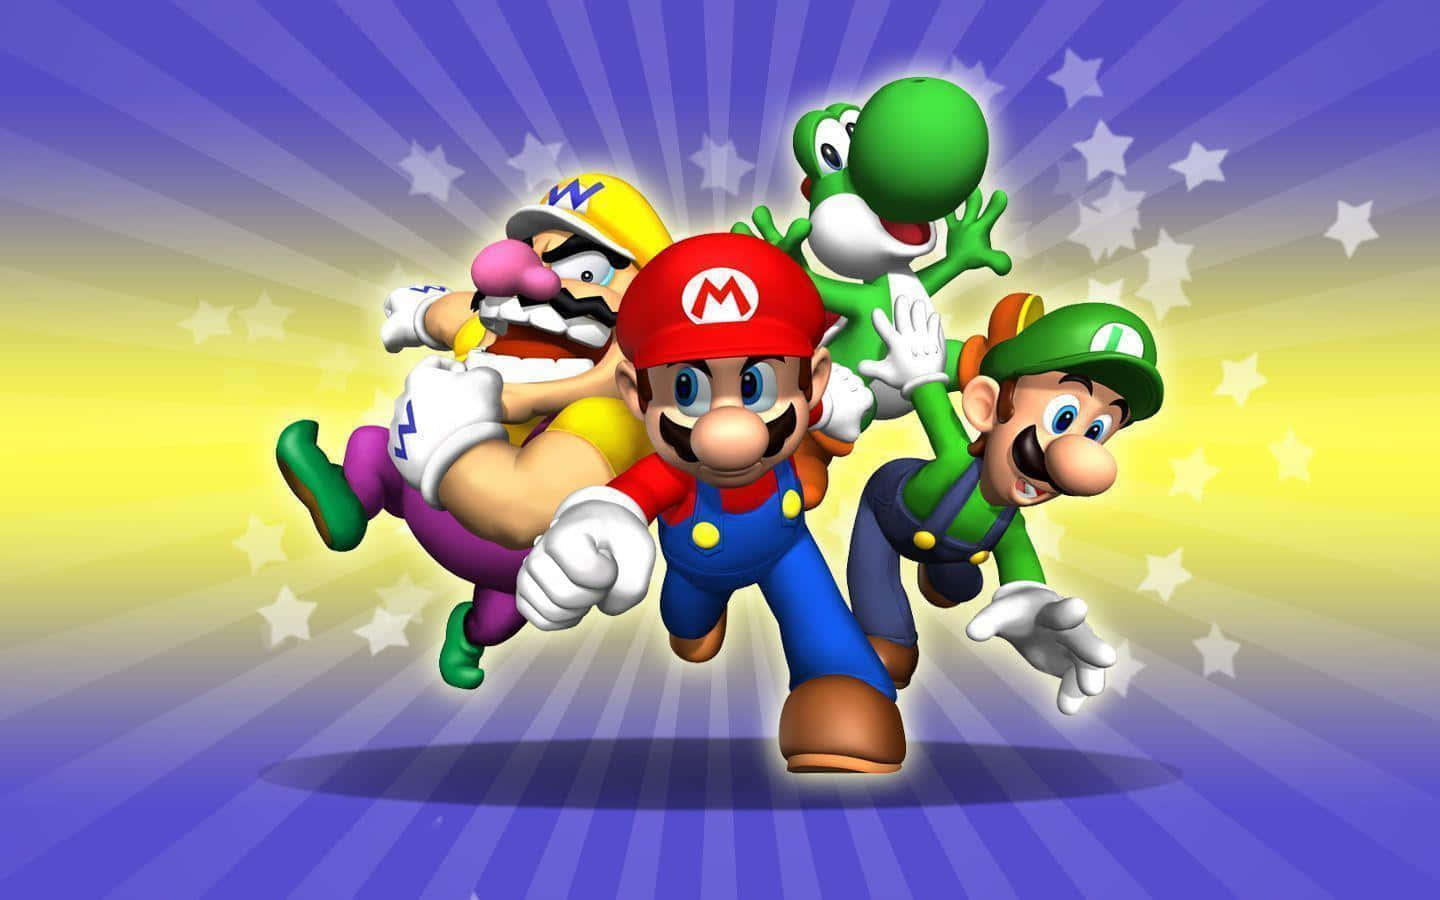 Jump over obstacles and explore new worlds with Super Mario!